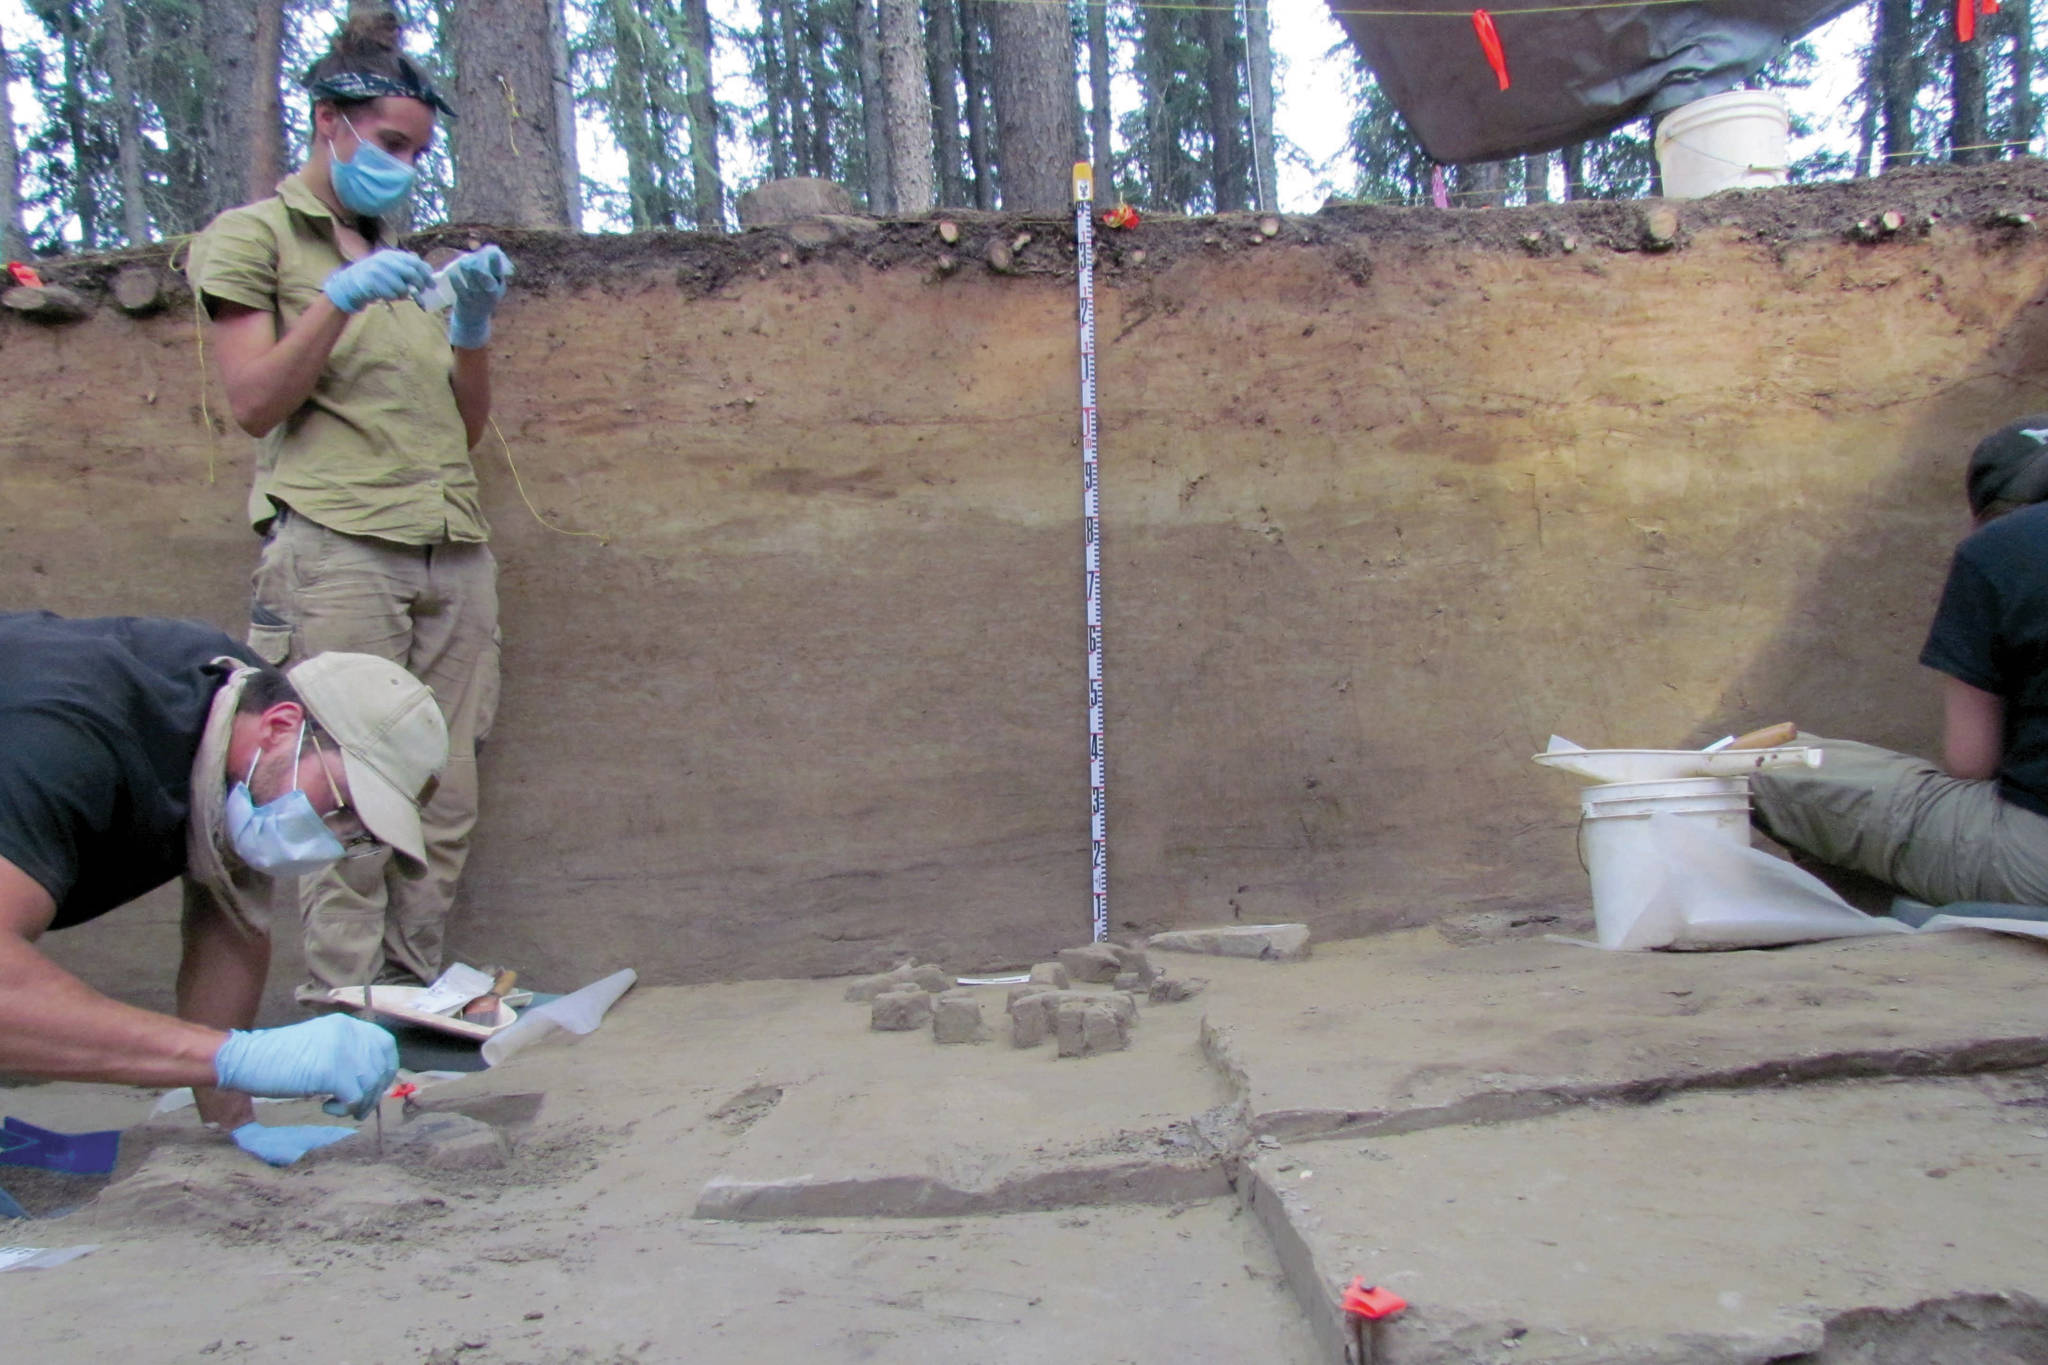 Archaeology students participate in a dig near Delta Junction, Alaska, conducted by Dr. Kate Krazinski and Dr. Brian Wygal of Adelphi University in summer 2019. (Photo provided by Kenai National Wildlife Refuge)